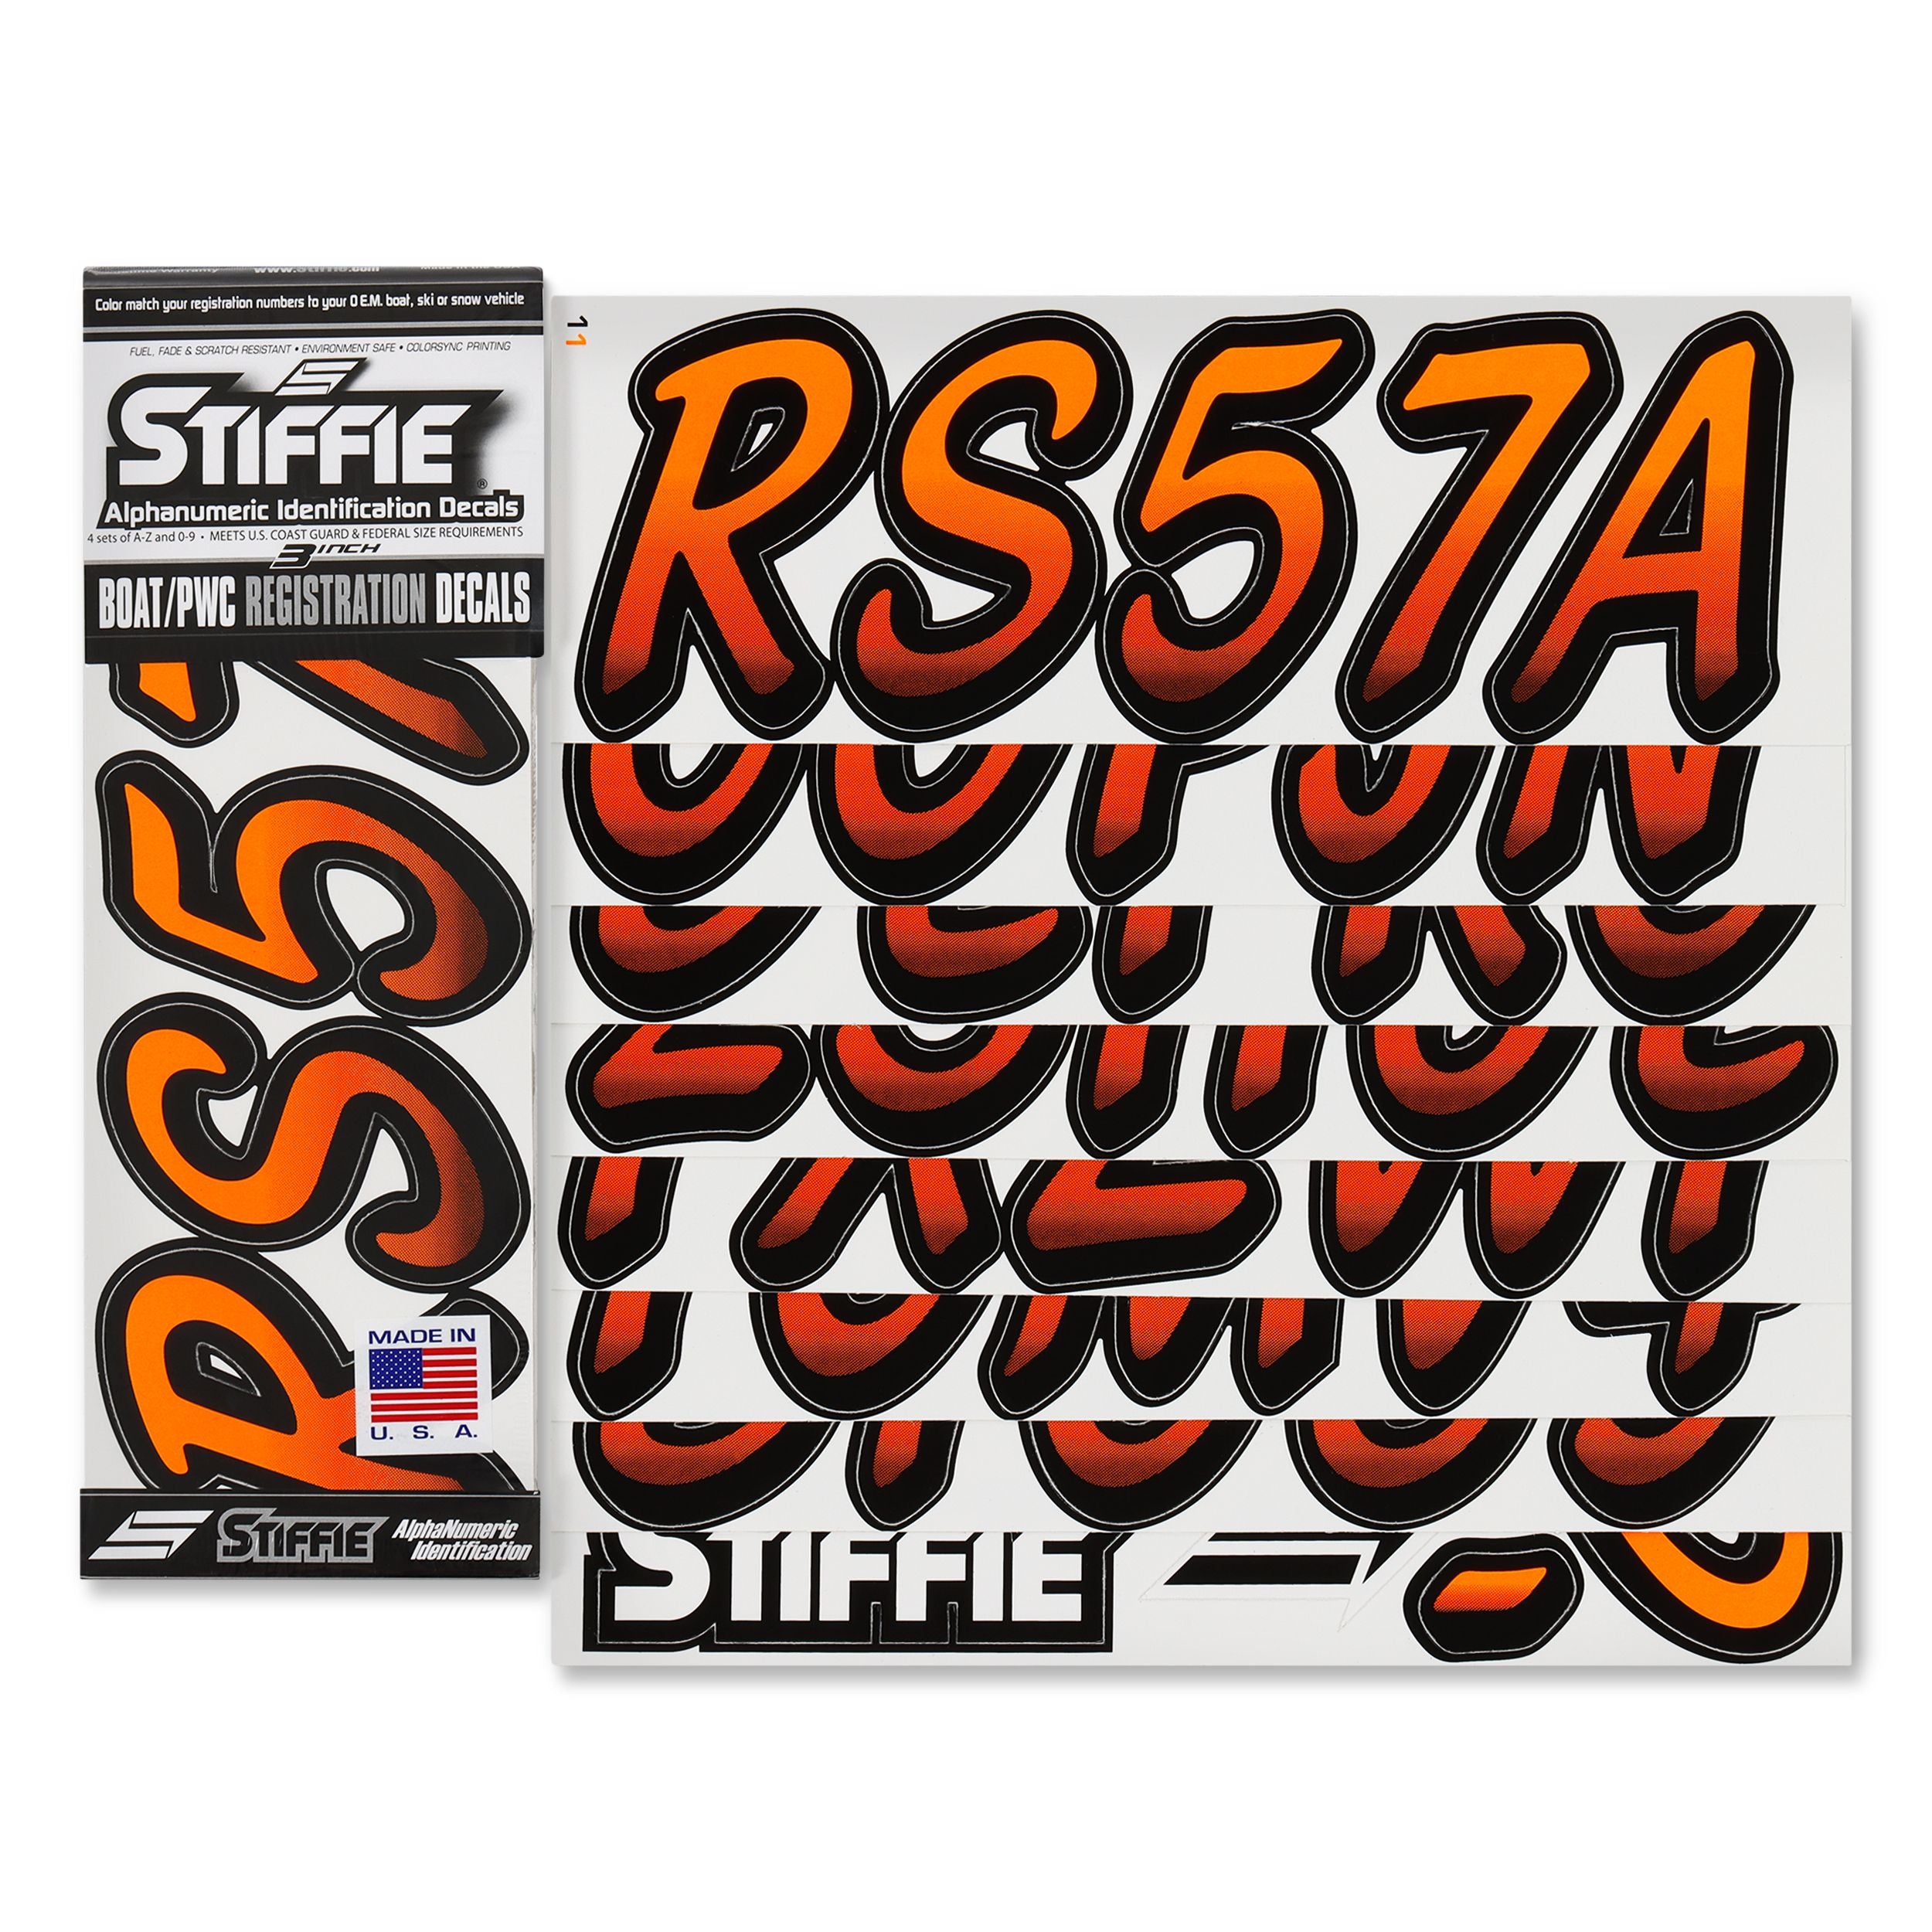 STIFFIE Whipline Electric Orange/Black 3" Alpha-Numeric Registration Identification Numbers Stickers Decals for Boats & Personal Watercraft